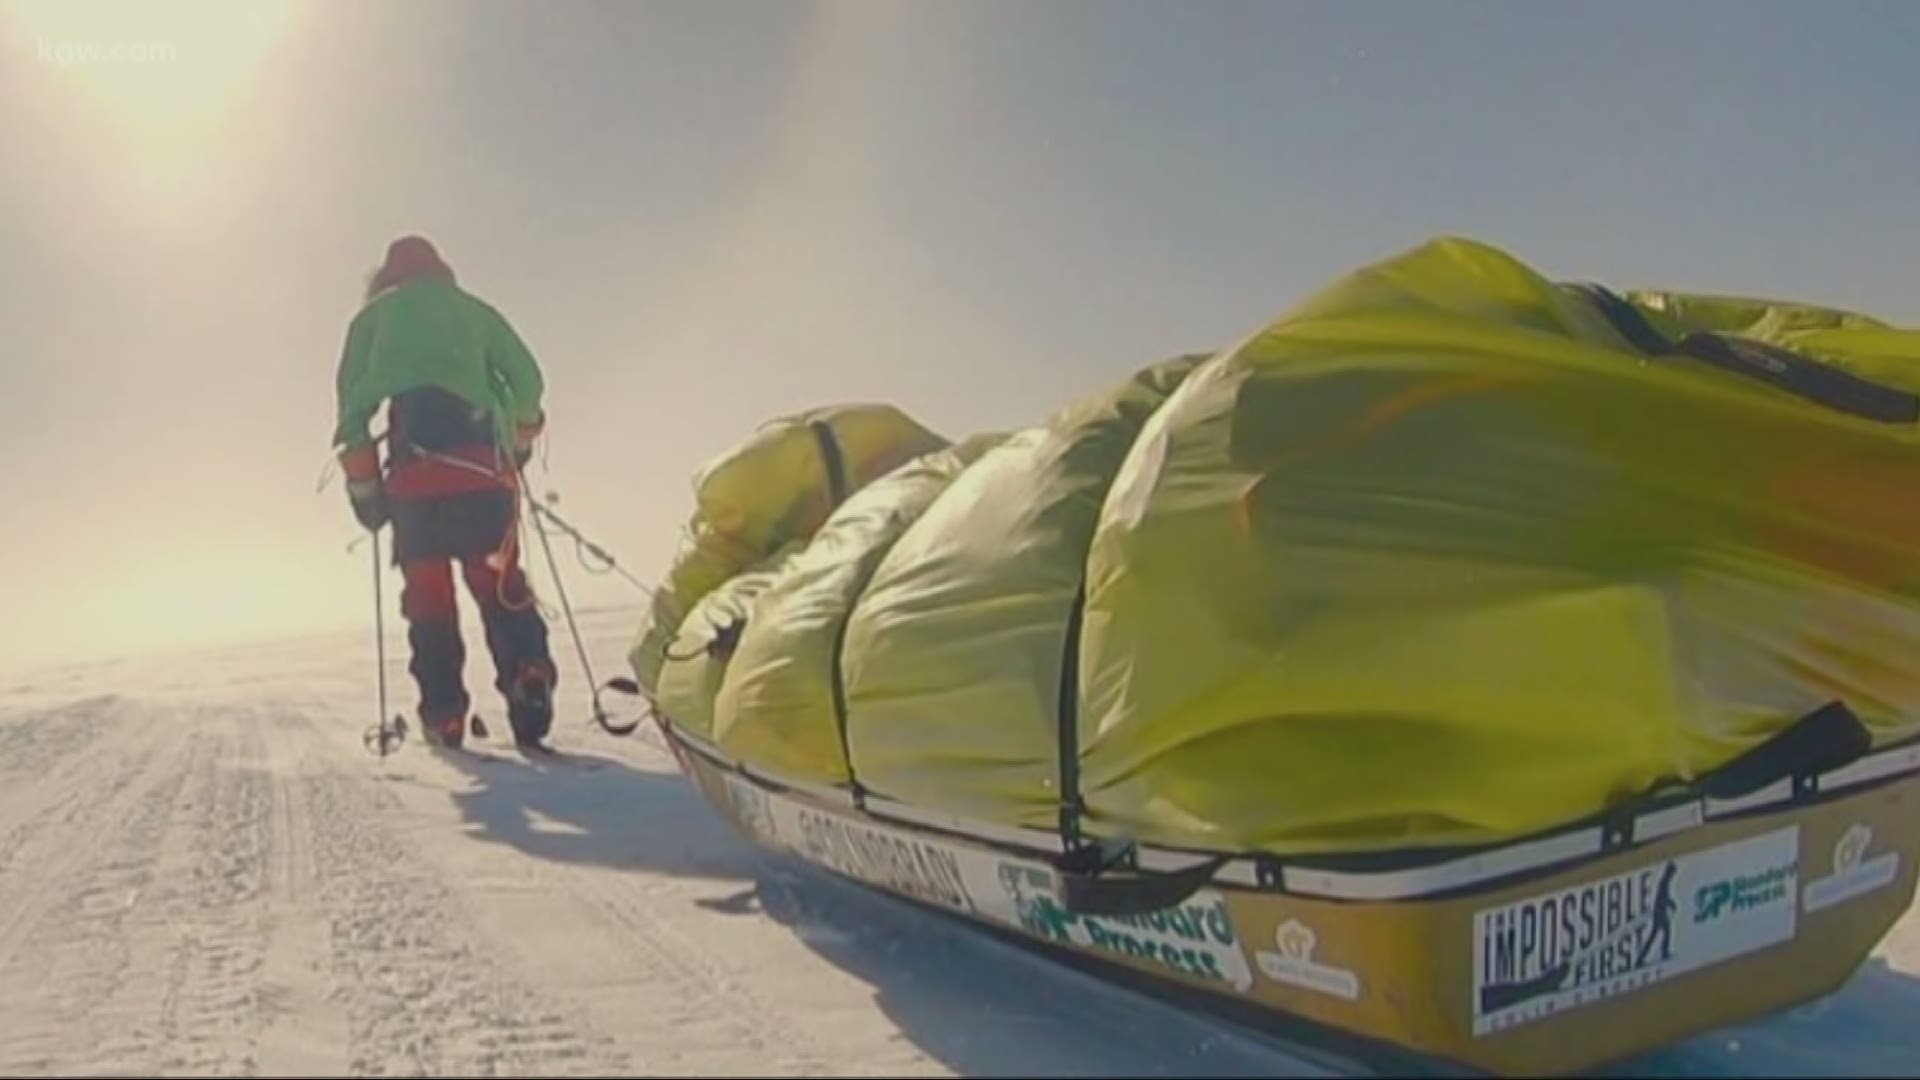 Praise is coming in for Portland’s Colin O’Brady after his trek across Antarctica.